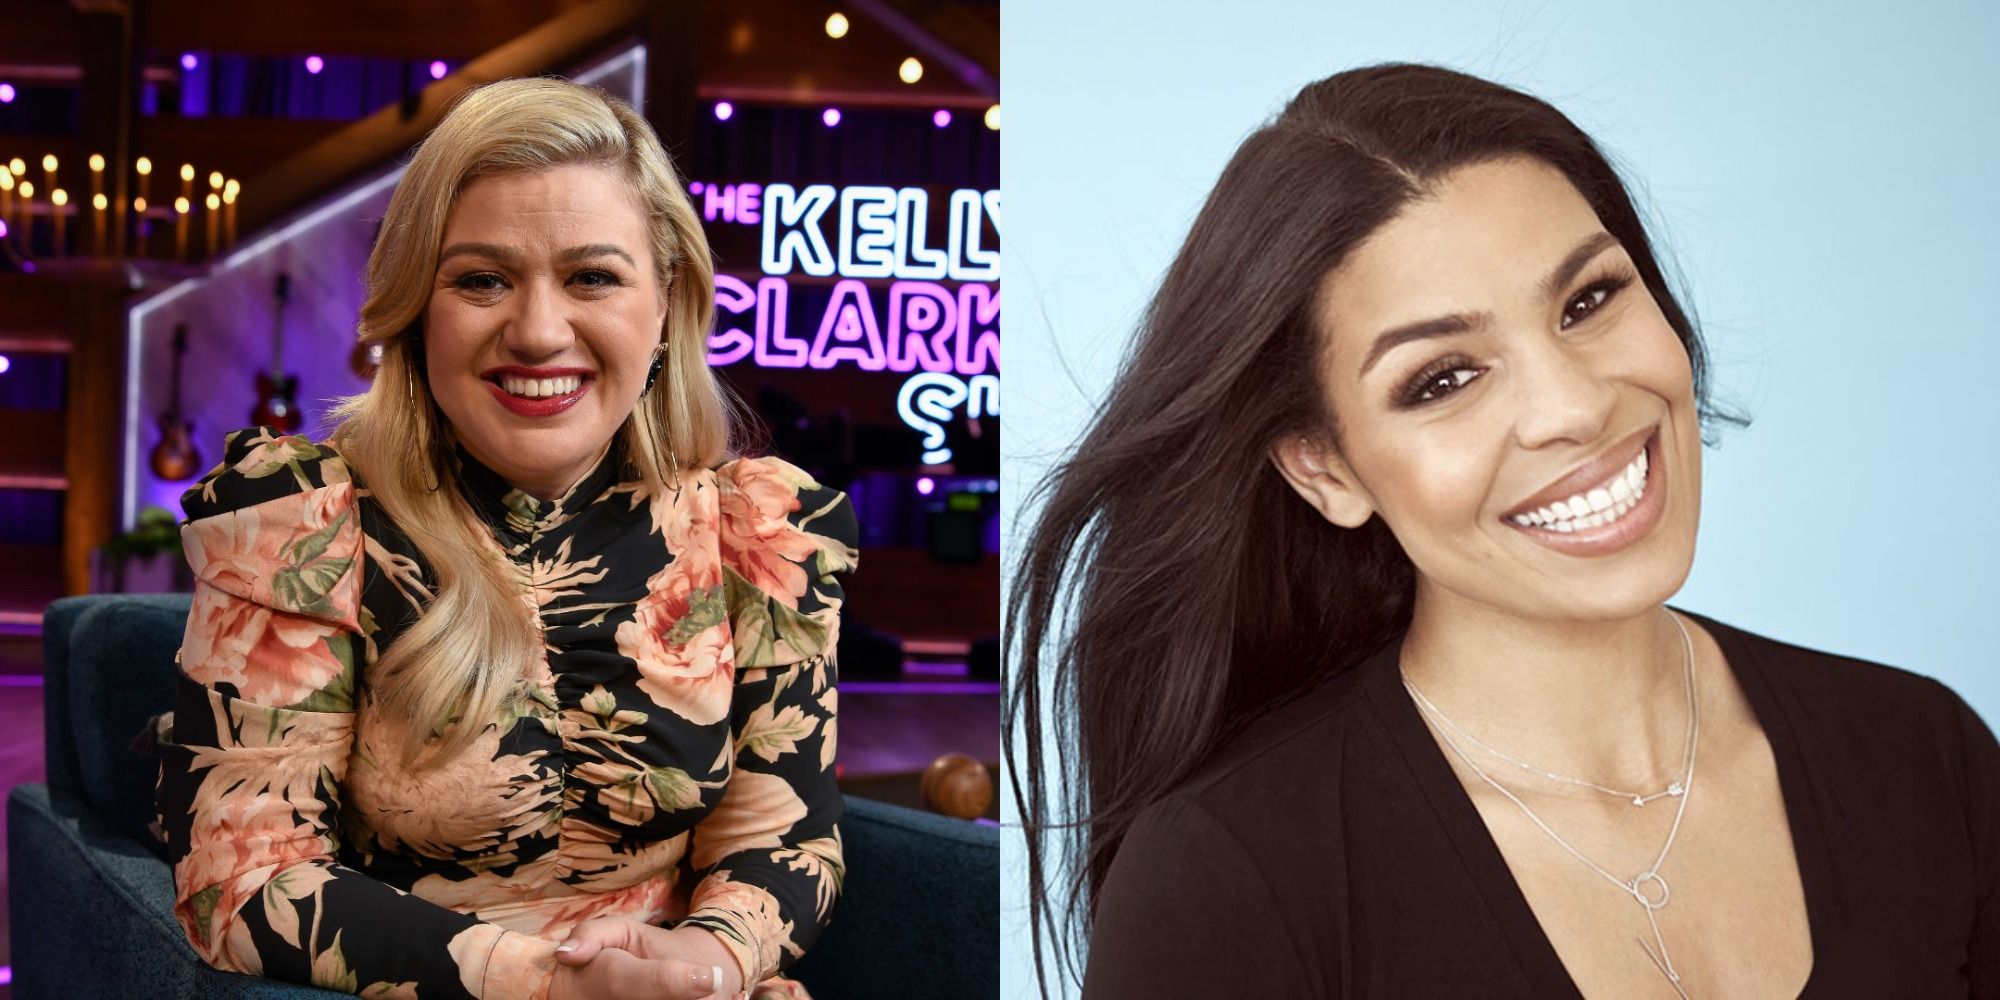 Split image of Kelly Clarkson in her talk show, and Jordin Sparks smiling during a photoshoot